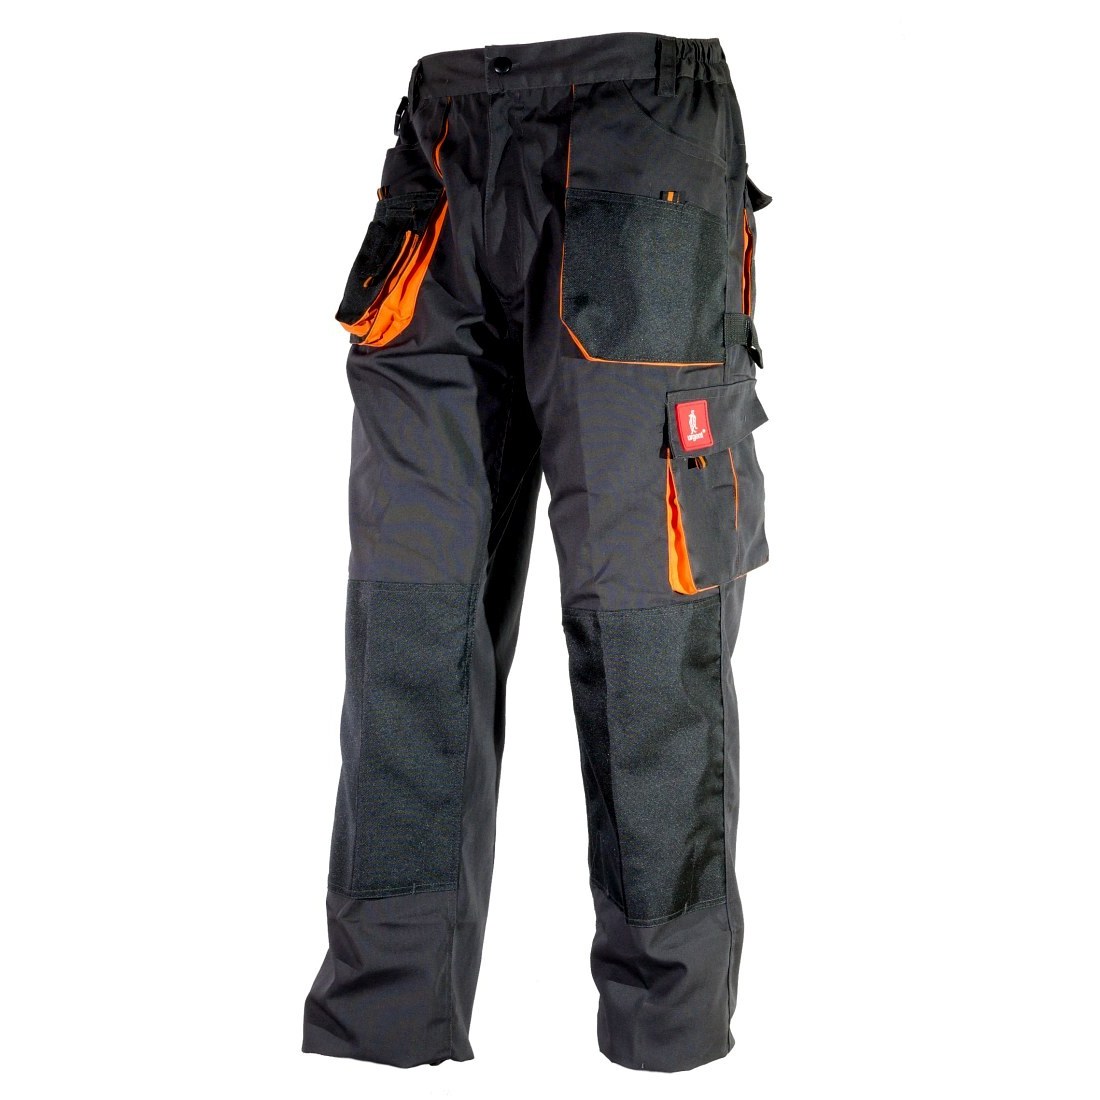 URGENT A INDUSTRIAL WORK TROUSERS,JACKET, BIB & BRACE SAFETY/PROTECTIVE ...